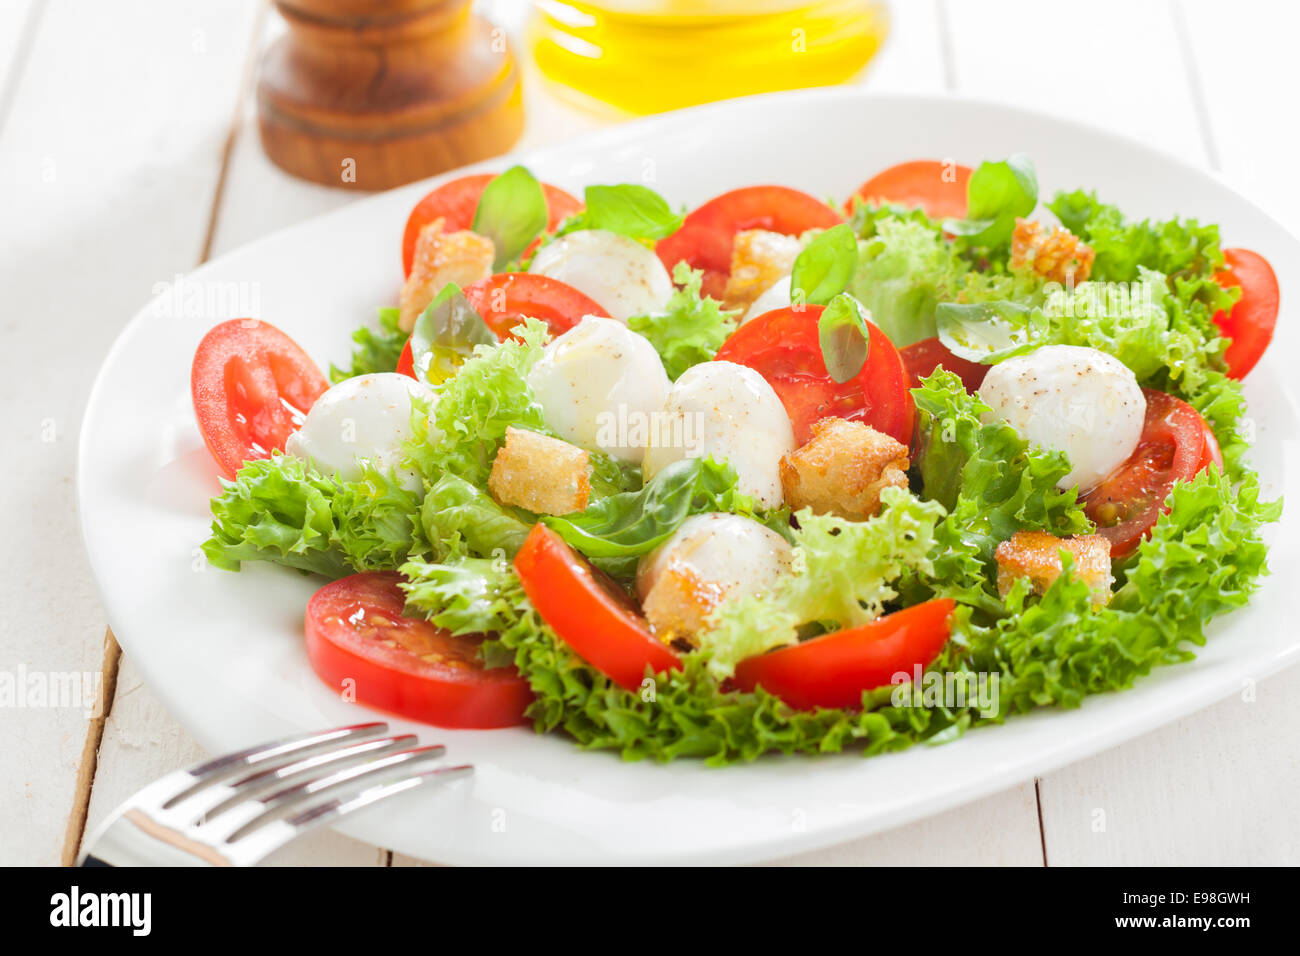 Delicious Italian mozzarella salad with crunchy fried bread croutons, sliced fresh tomato herbs and frilly lettuce served on a plate on white wooden boards Stock Photo